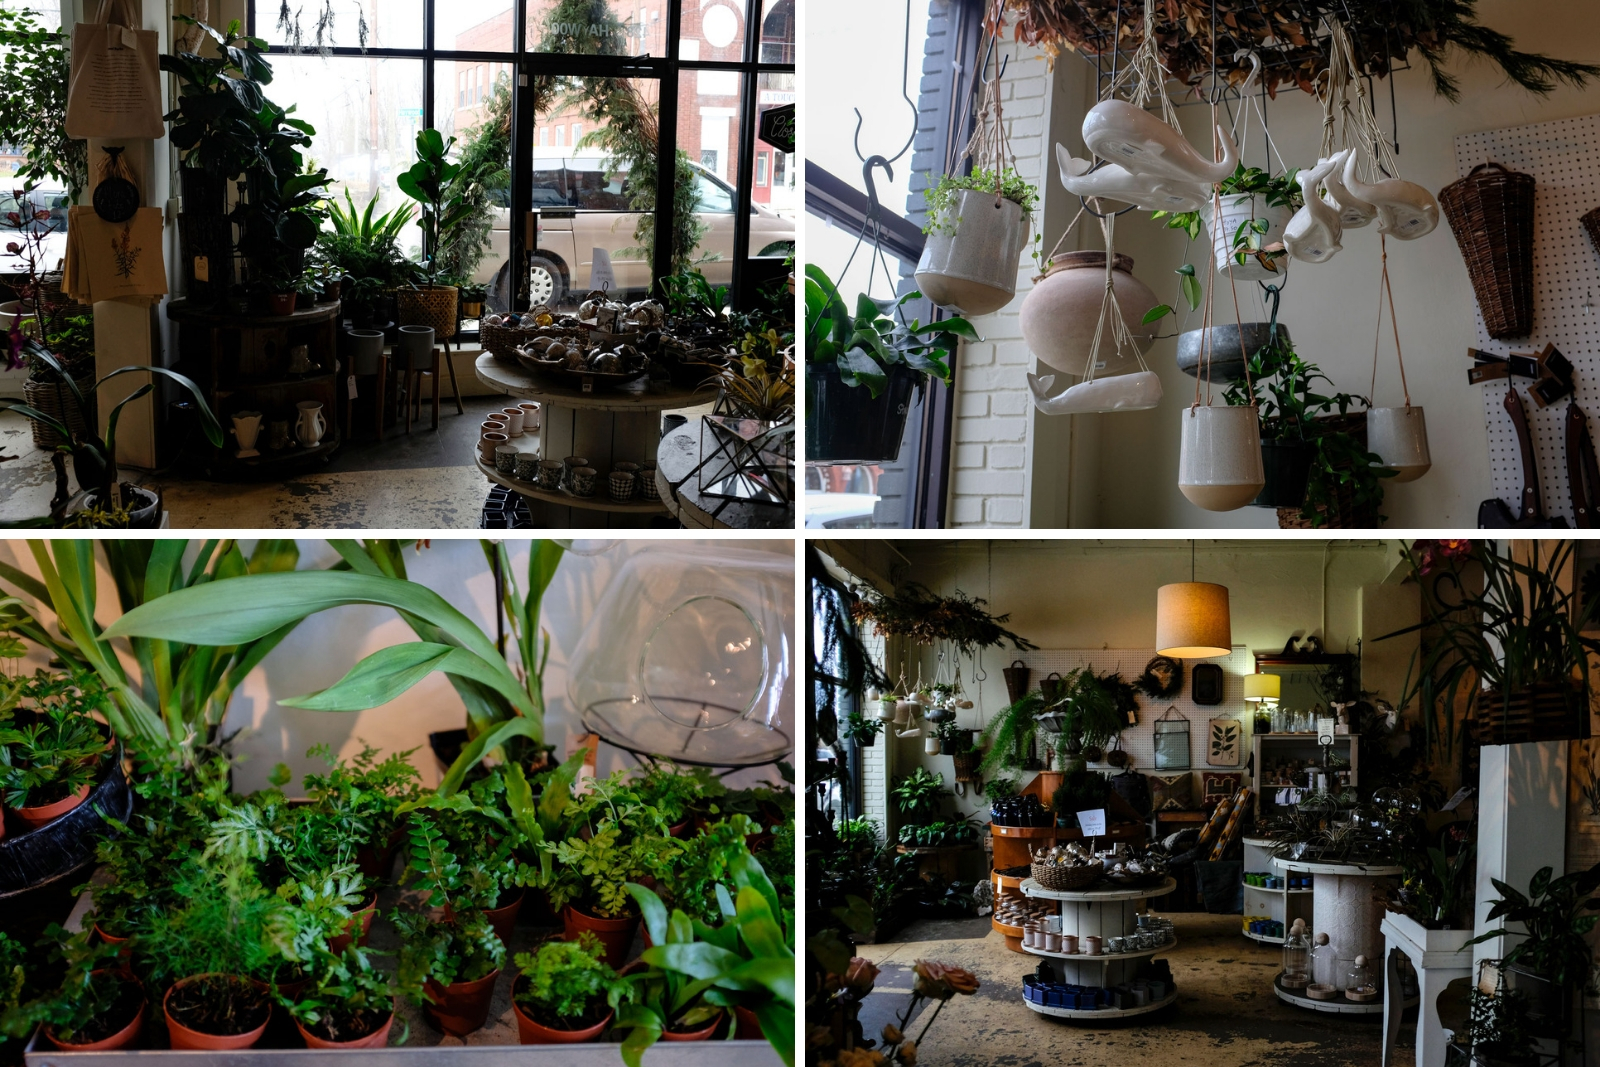 Four images of Flora Asheville's Interior